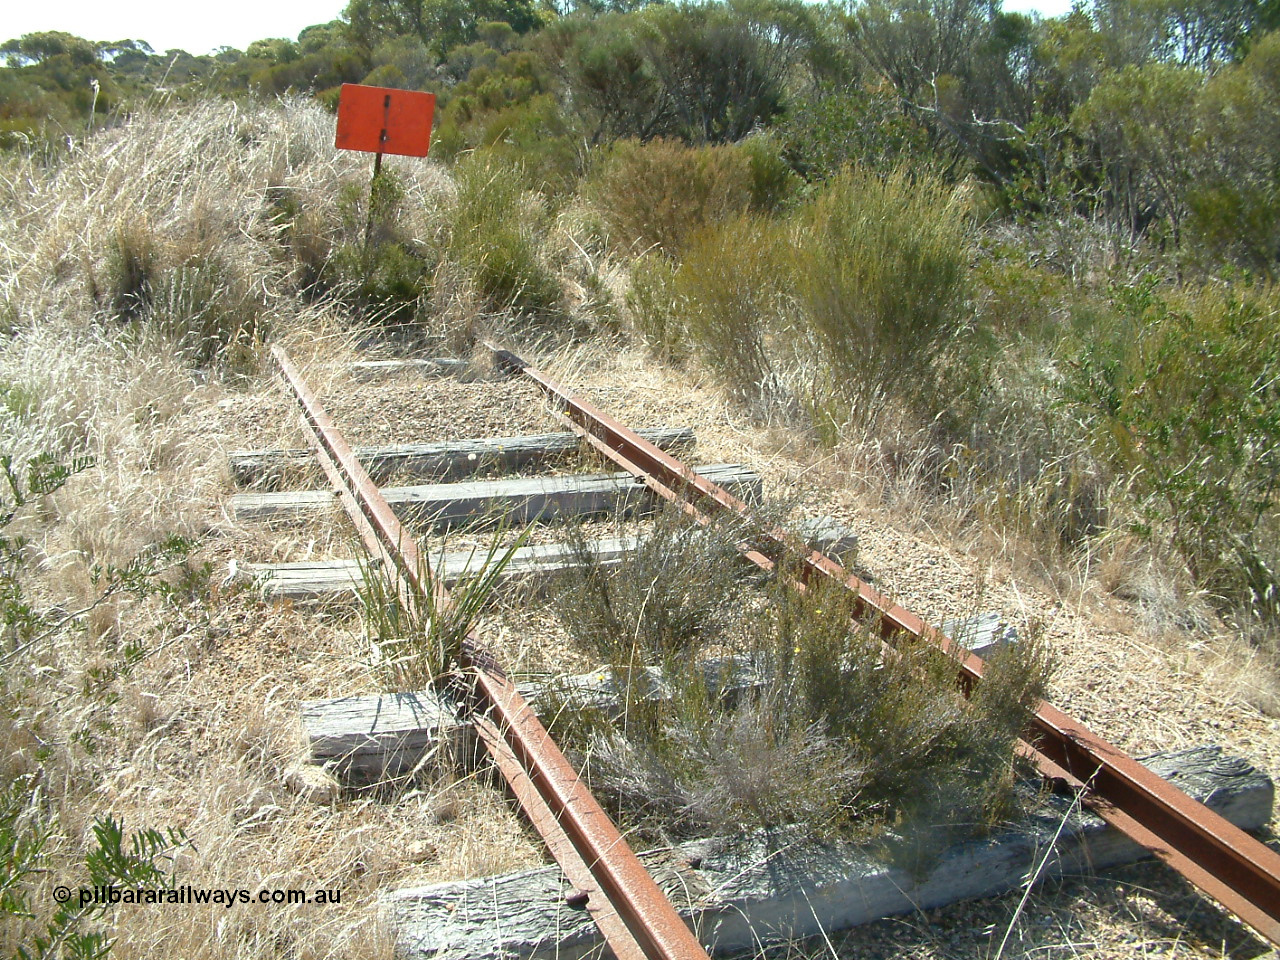 030406 141510
Kapinnie, end of the line, terminus of the former continuation for the Mount Hope line. 6th April 2003.
